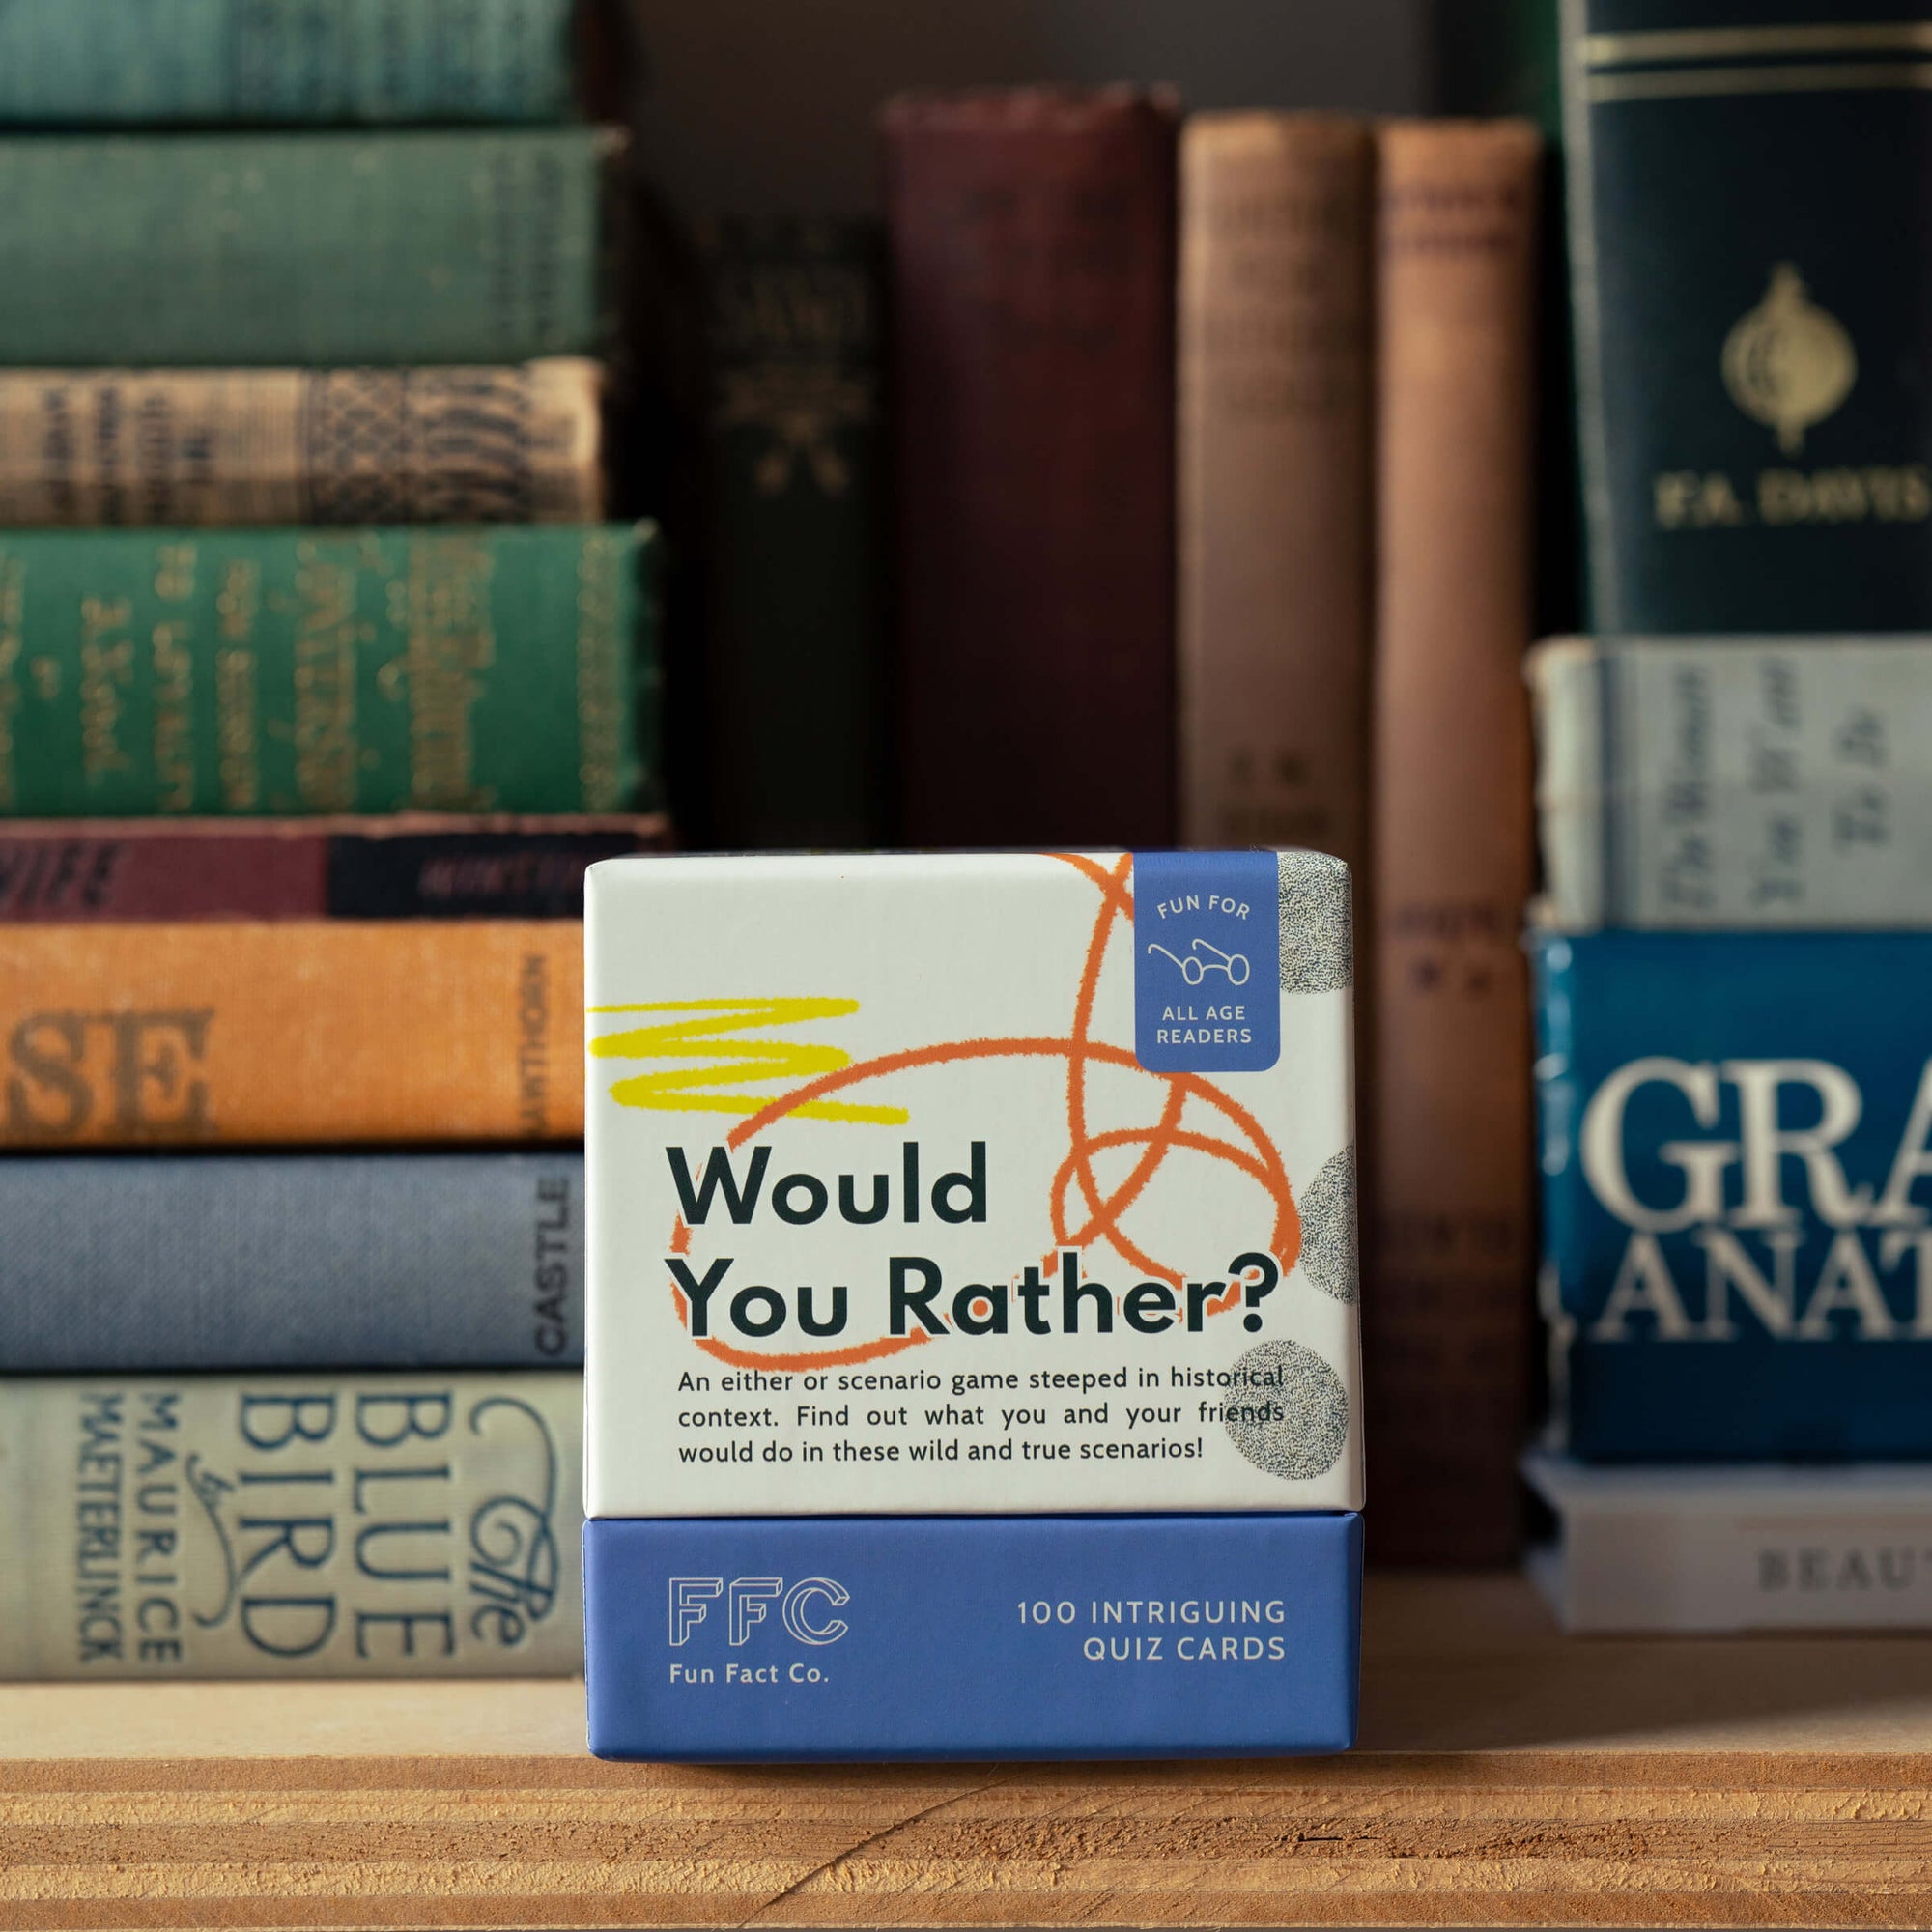 Would you rather game on bookshelf